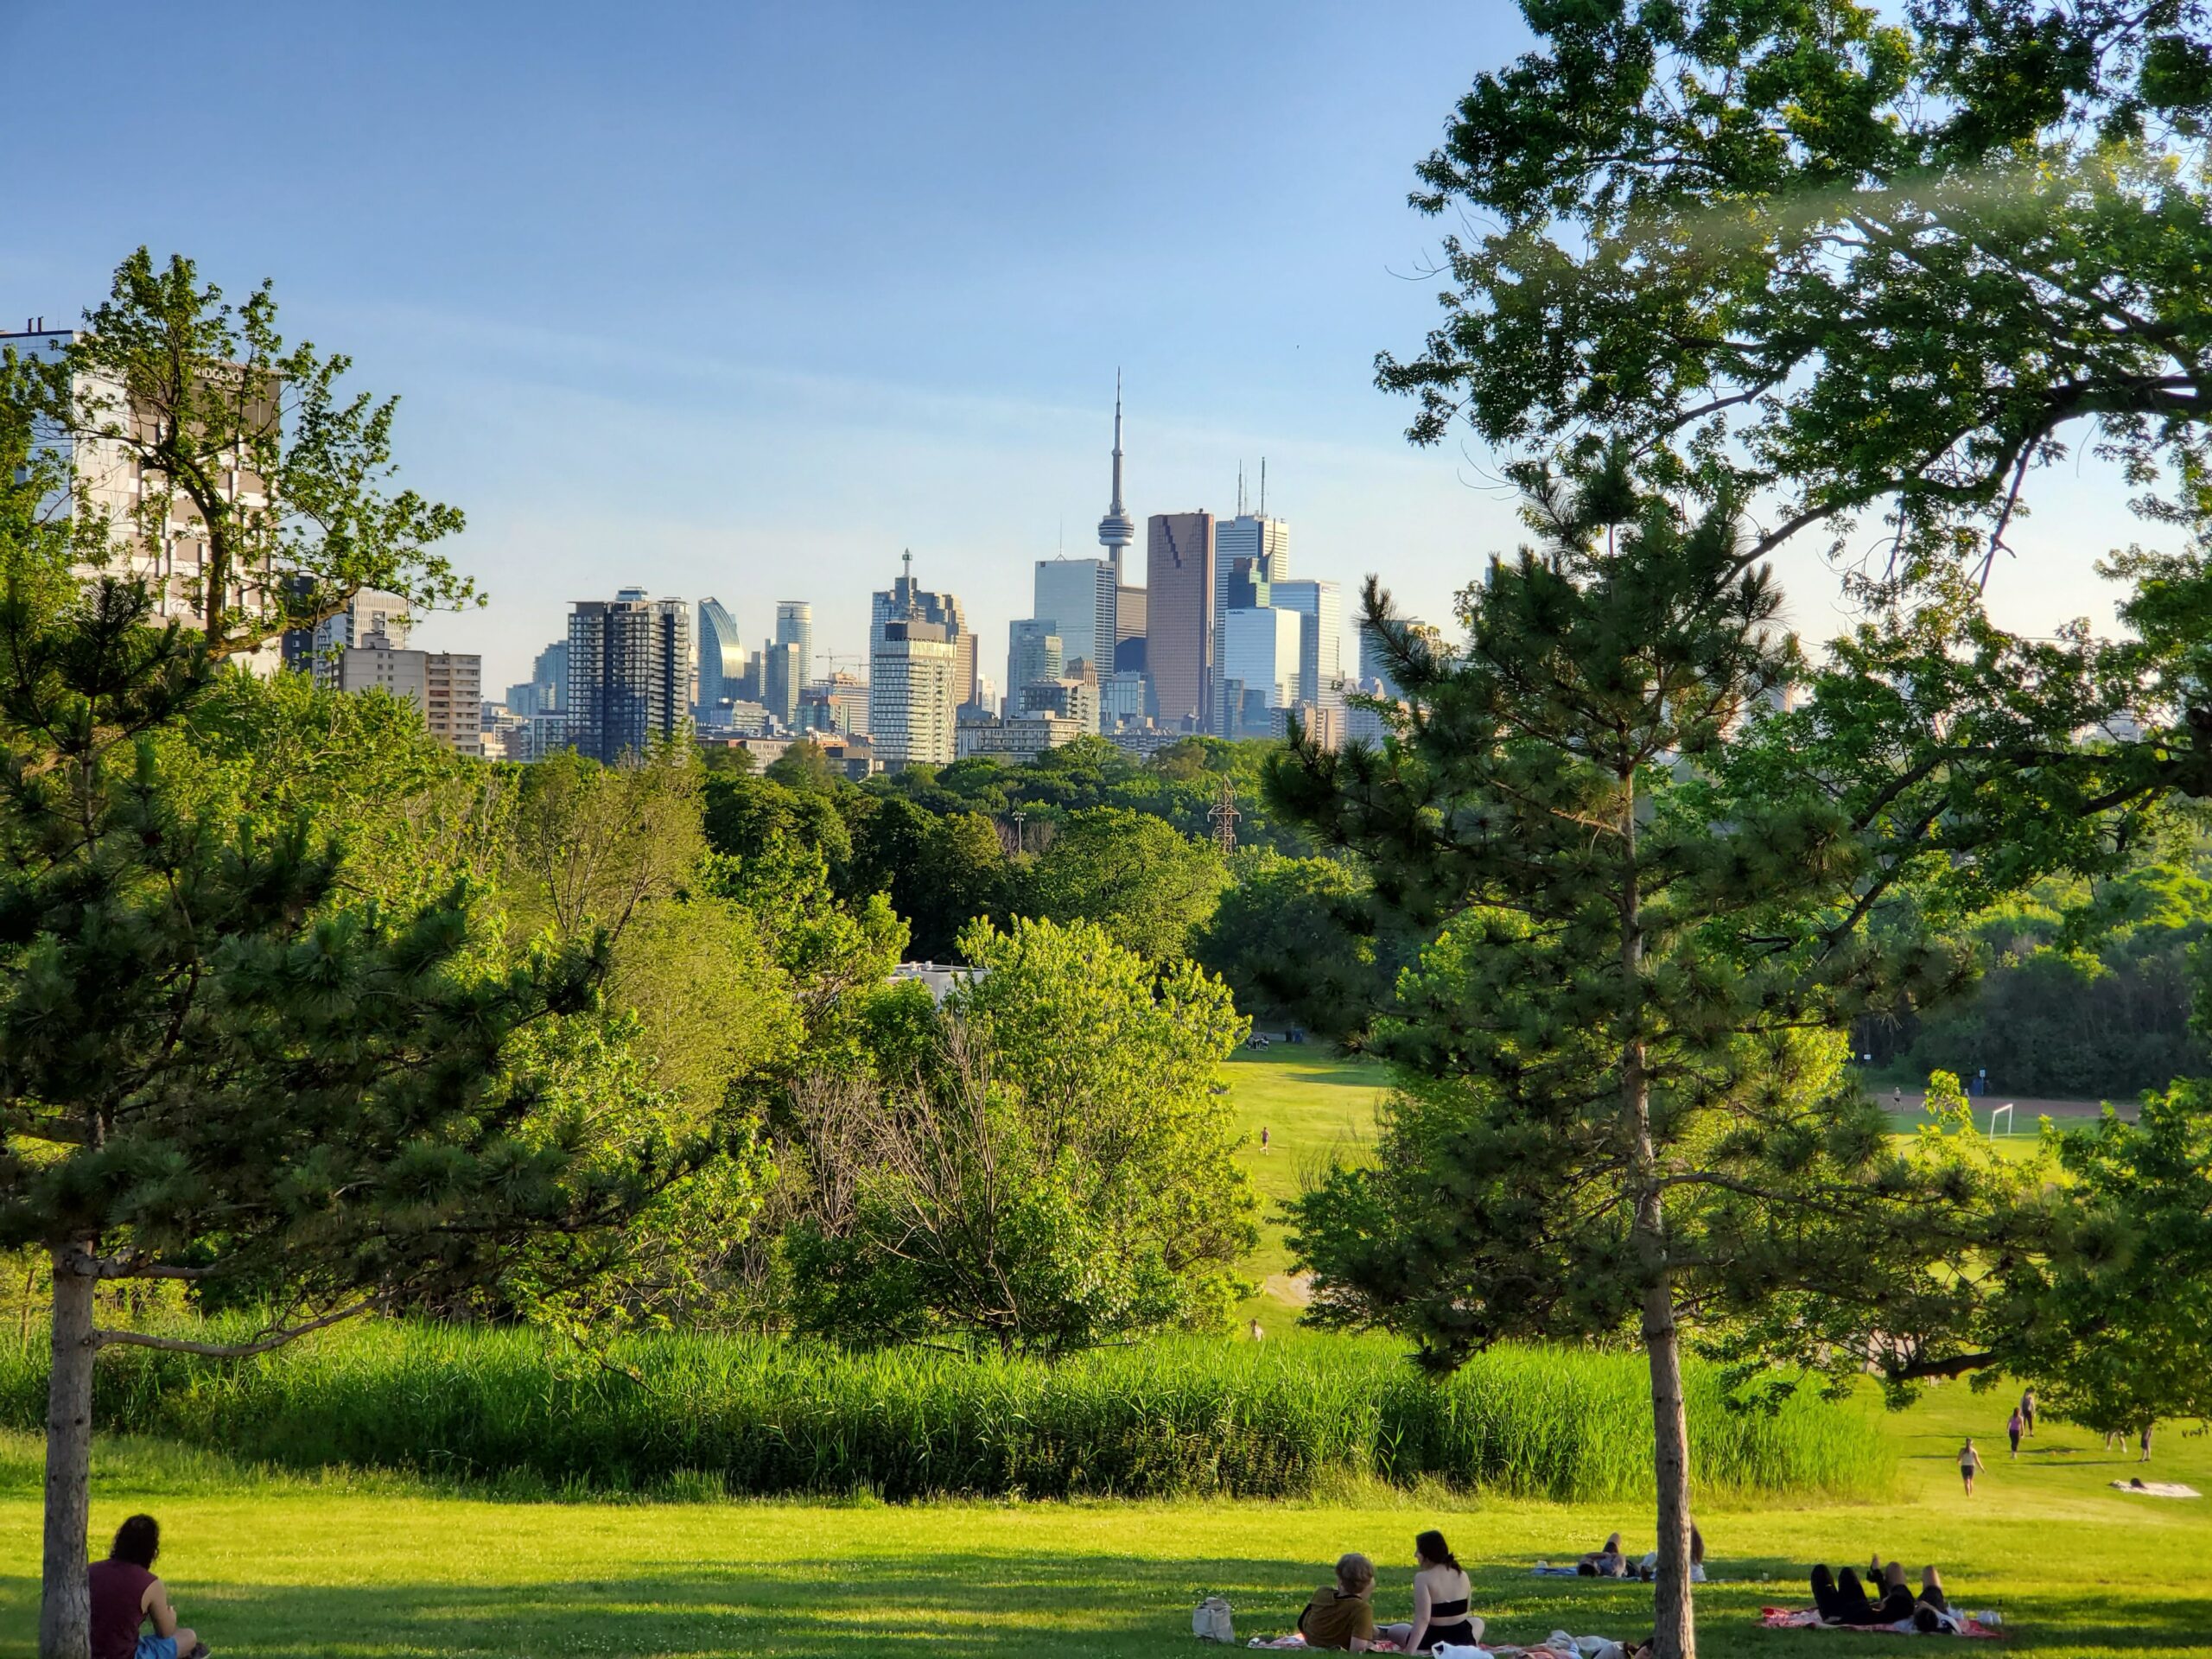 Transitioning Cities Towards a Nature-Based Future